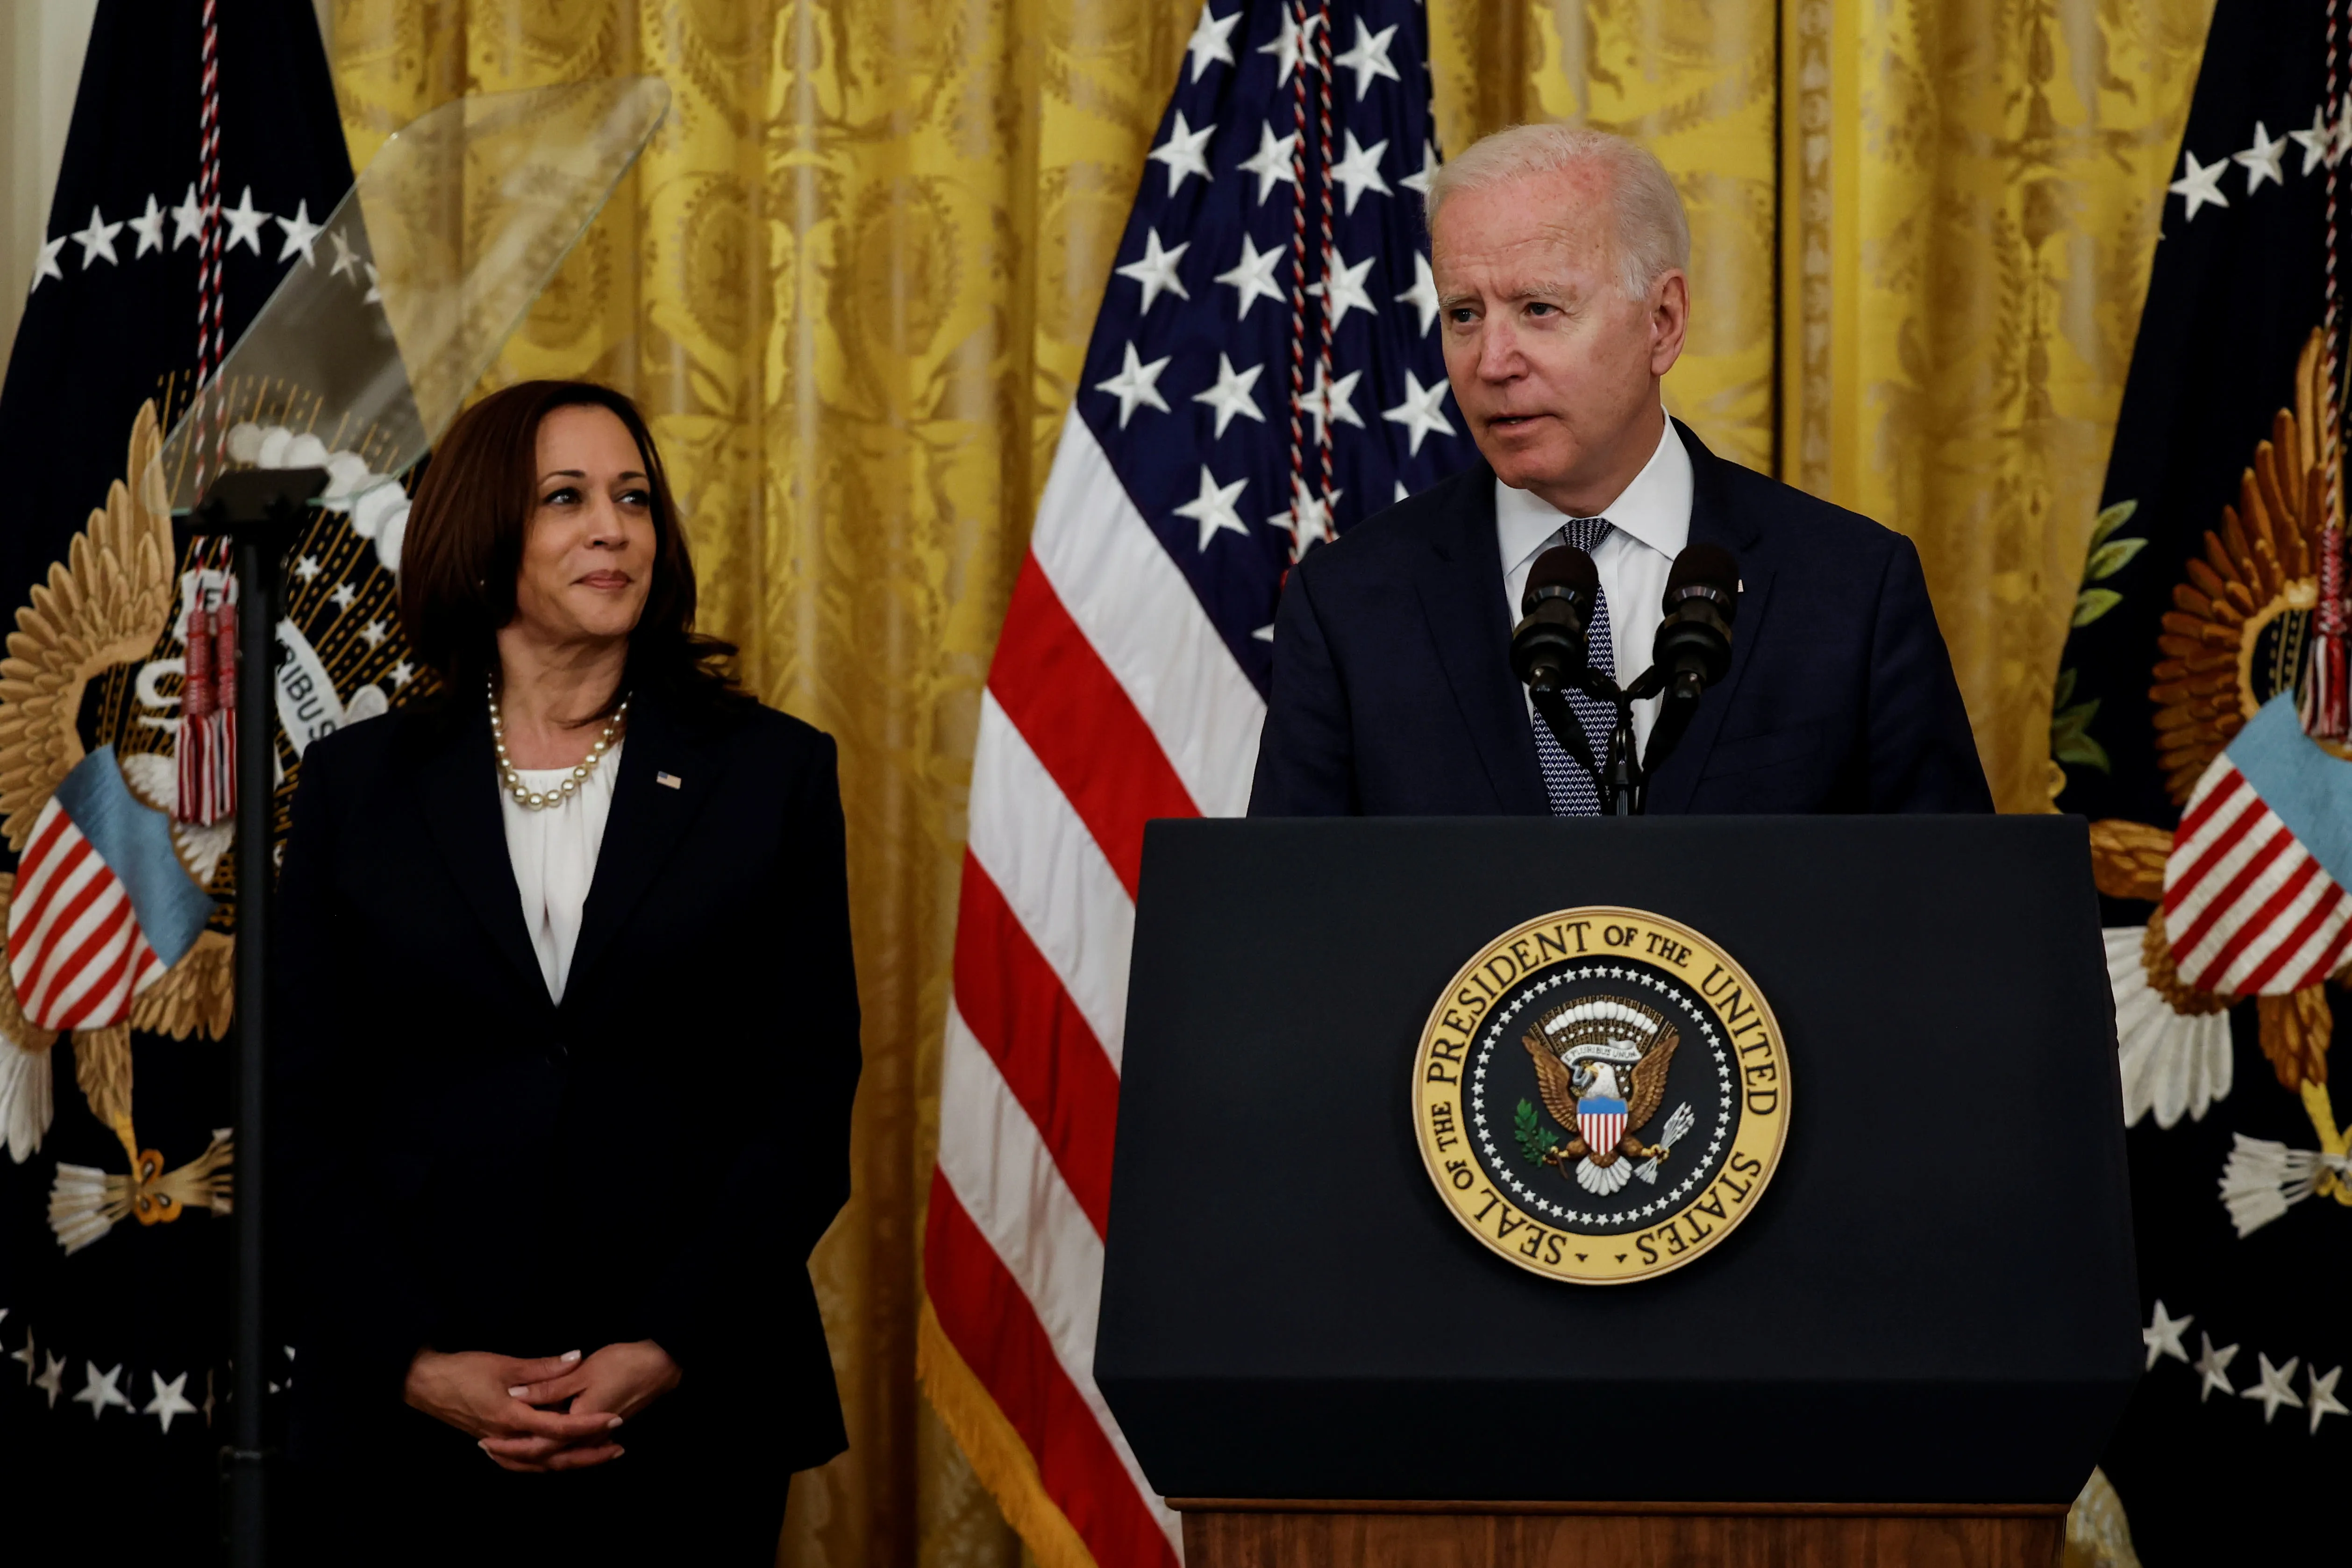 The Biden-Harris administrations gender strategies and policies Strengths, challenges, and opportunities Brookings photo